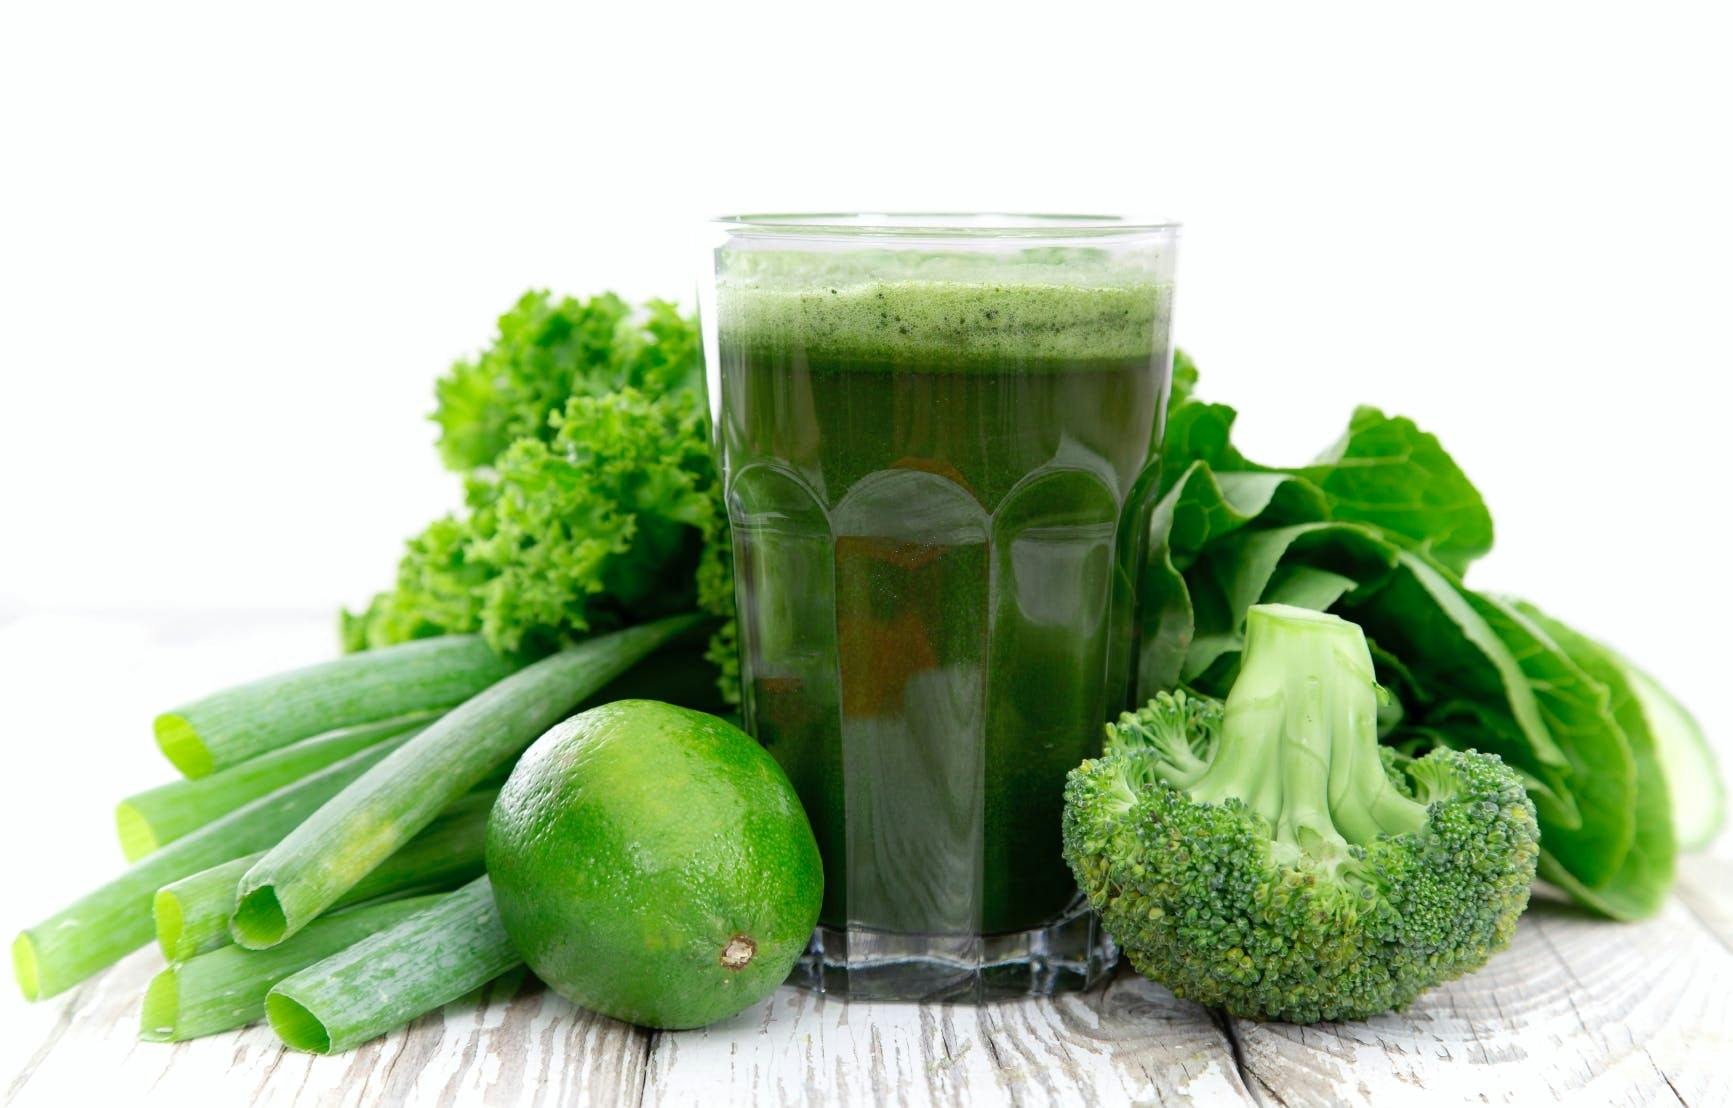 green drink vegetable juice vegetarian table spinach organic wood background parsley nutrient food kale photography raw shake basil nobody glass green smoothie leaves leaf cold smoothie color image vertical natural healthier nonalcoholic healthy eating plant beverage